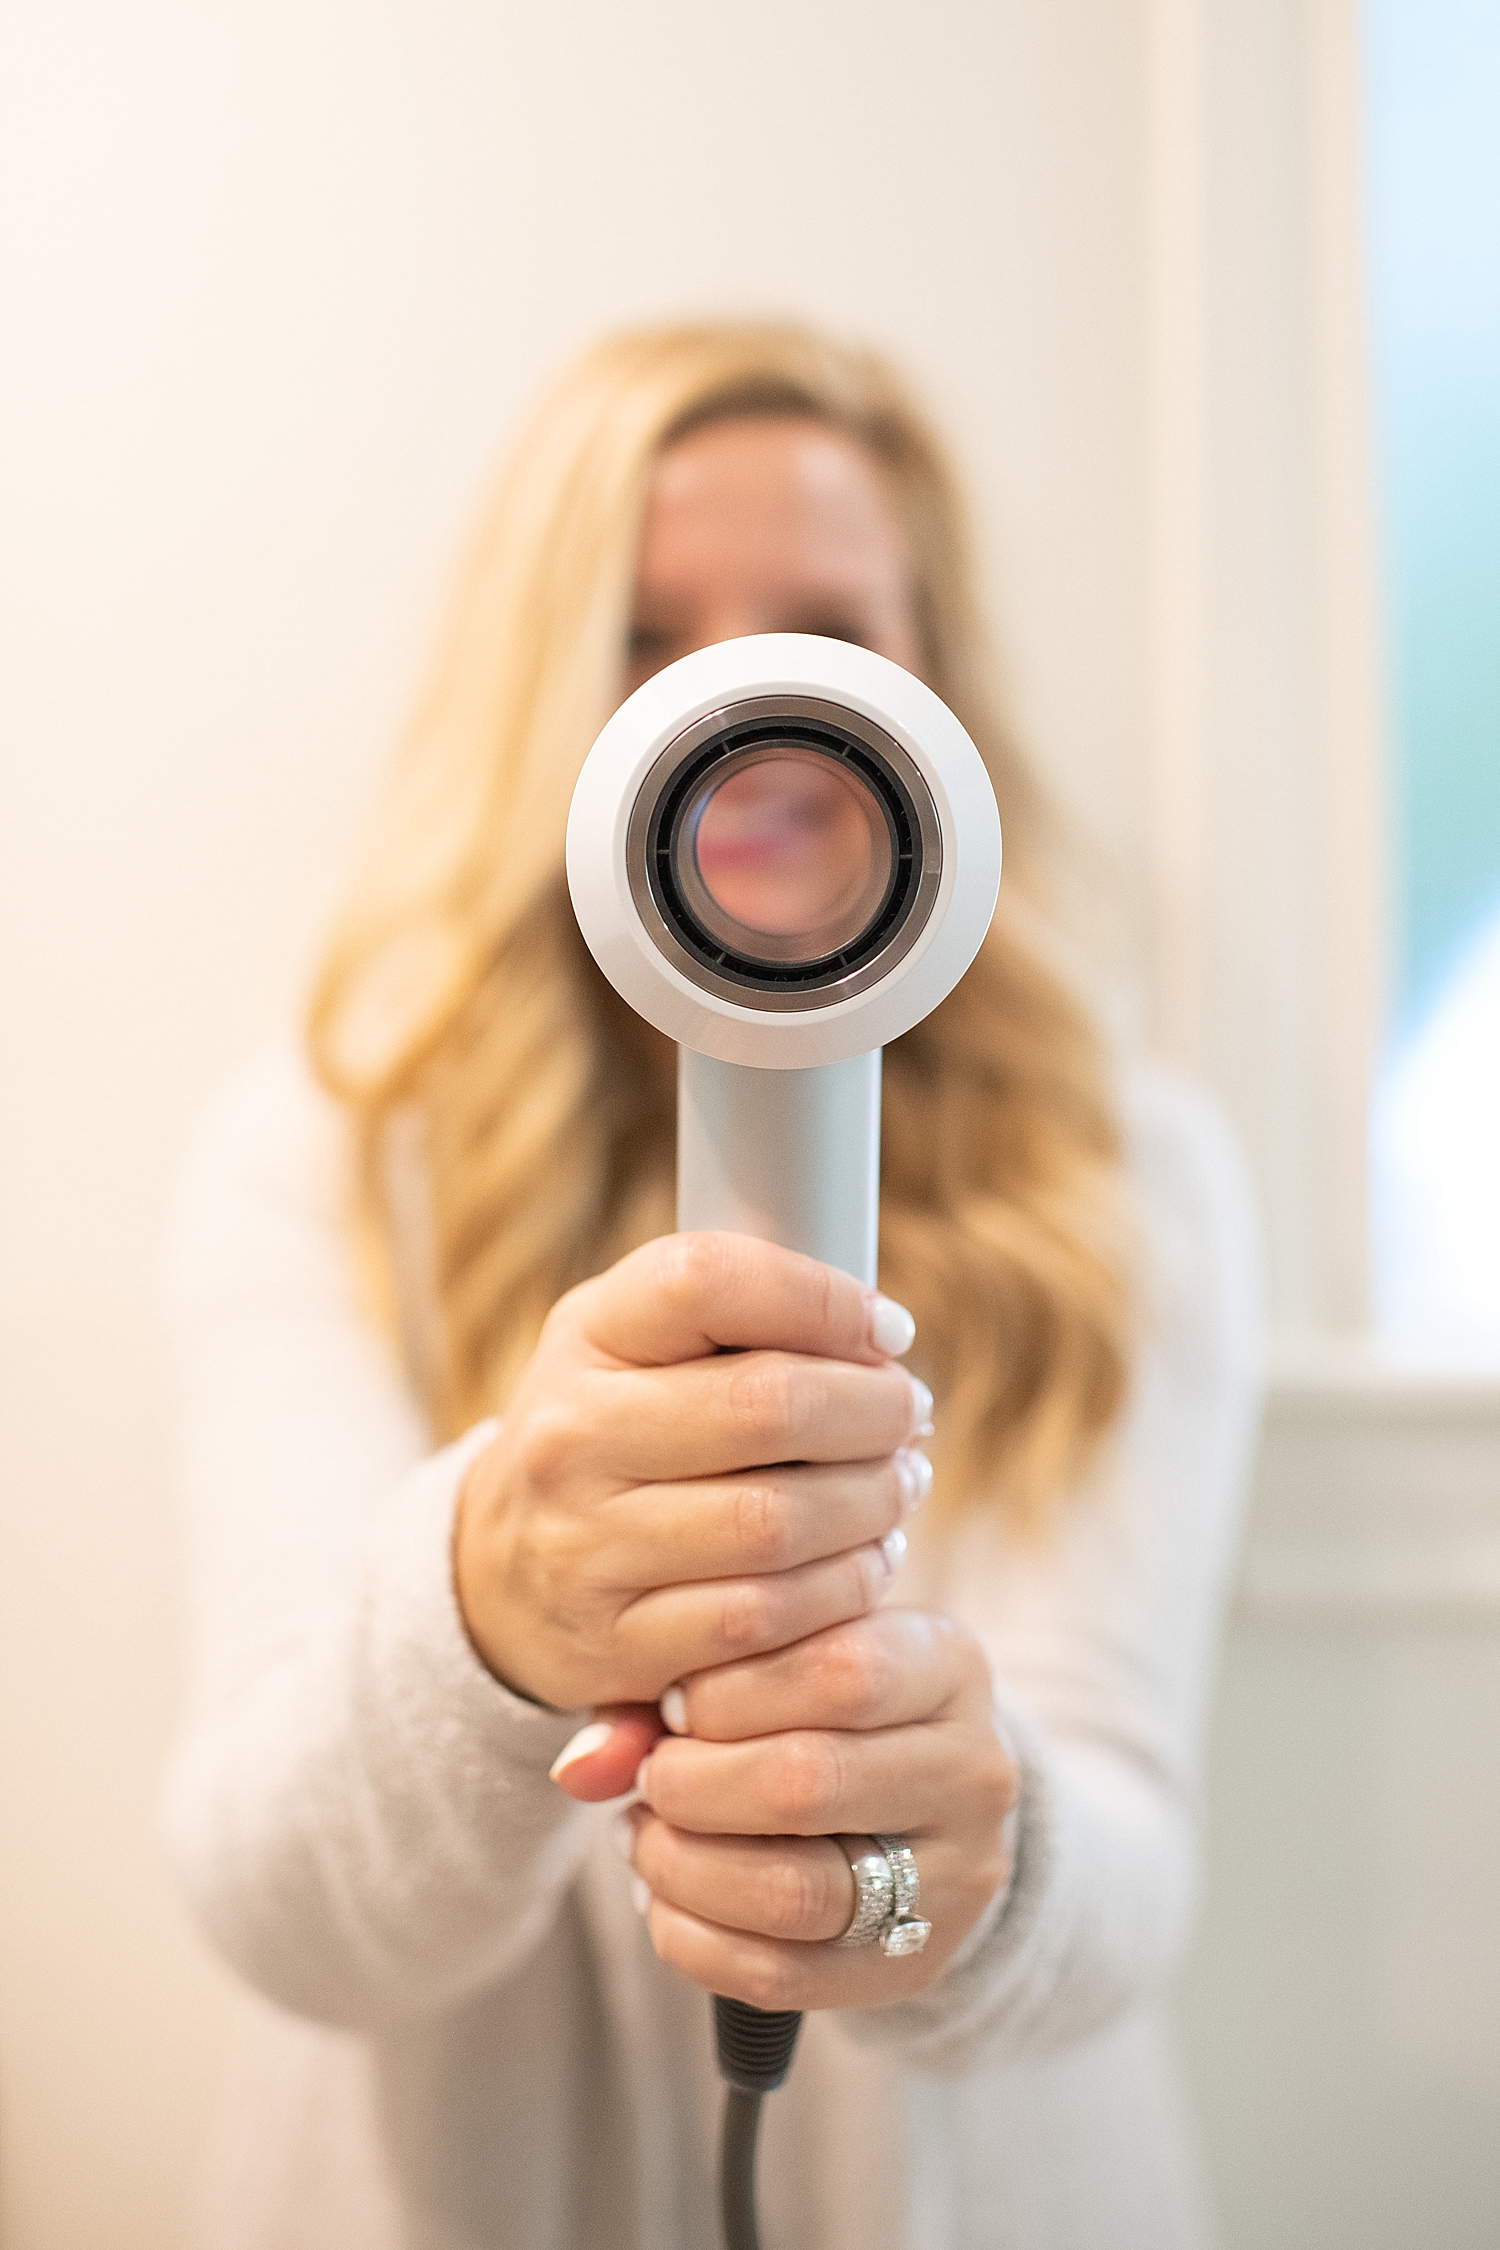 Dyson Supersonic Hair Dryer review featured by Houston life and style blogger, Fancy Ashley